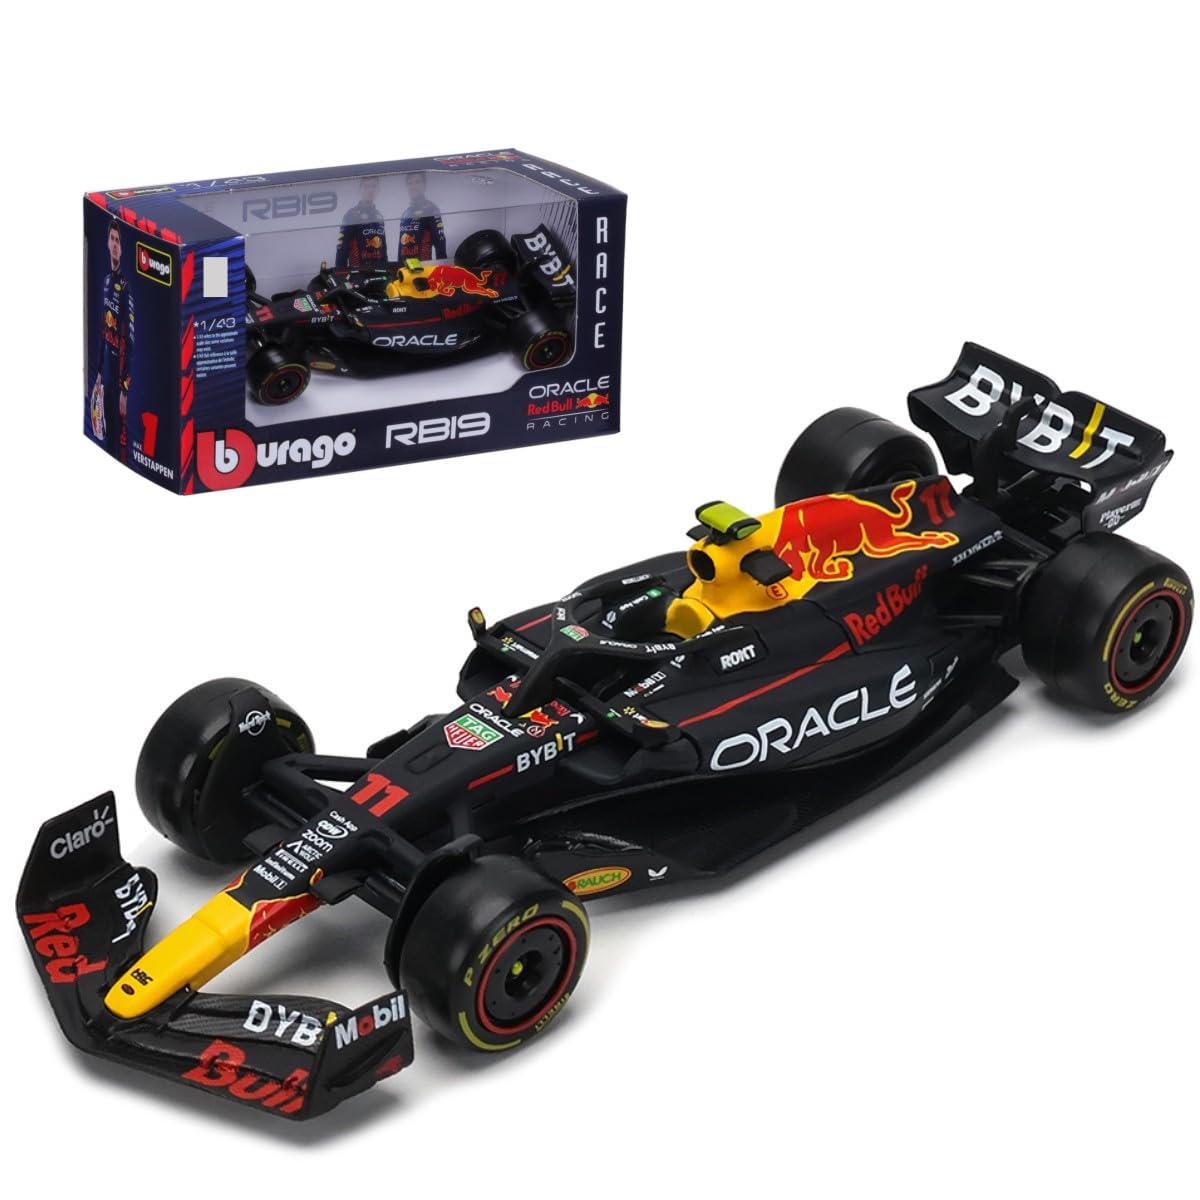 HTLNUZD Bburago 1:43 2023 New F1RB19#11 F1Champion Racing Formula Alloy Car Perez 1/43 RB19 No.11 for Red Bull Team for Red Bull Die cast Model Car Collection Gift